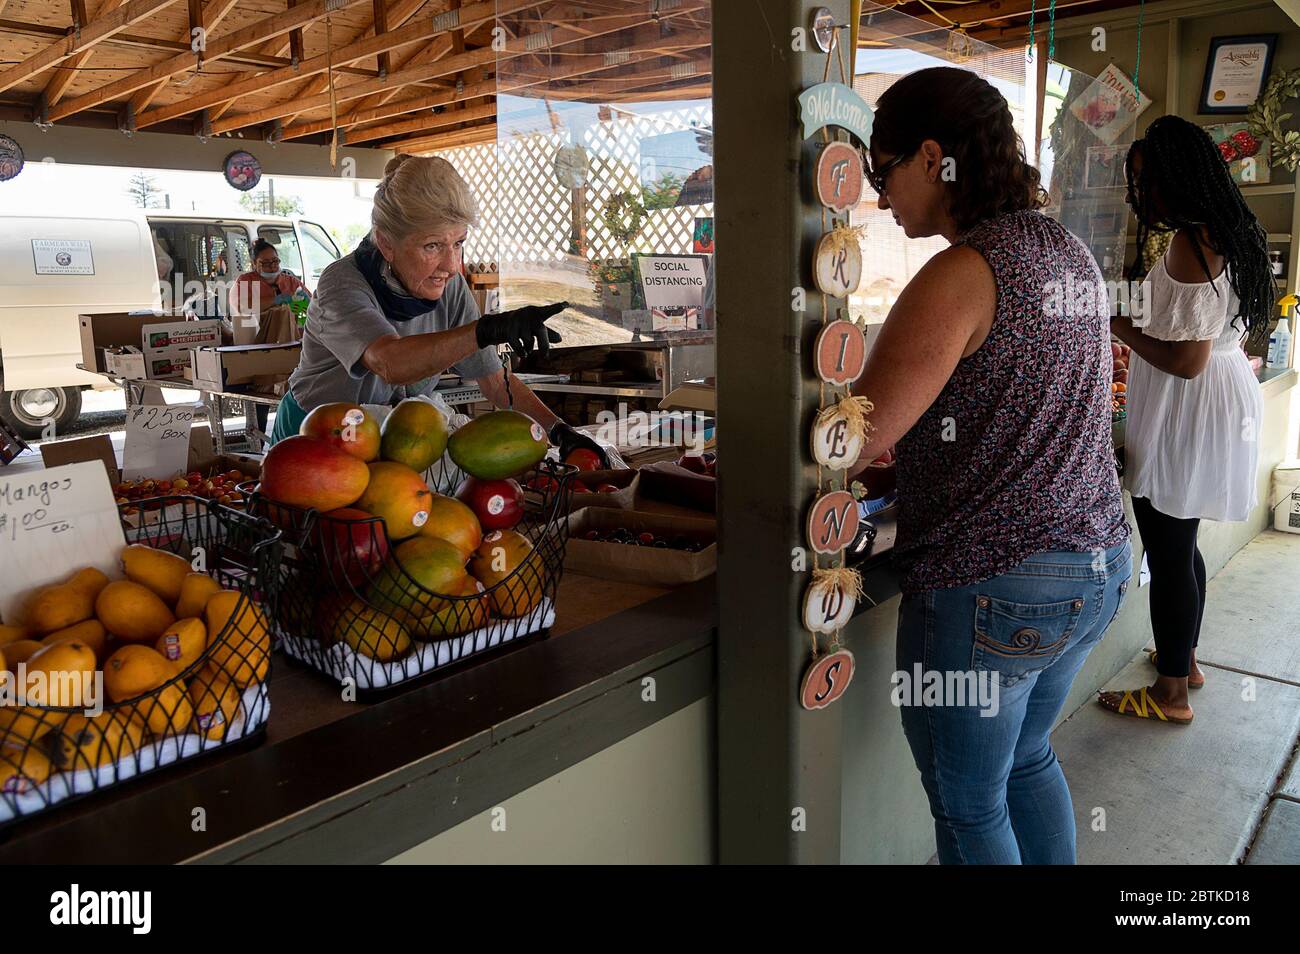 Carmichael, CA, USA. 26th May, 2020. Rosemarie Martell wearing gloves talks with her customer Anita Myers of Grass Valley behind a plastic shield at the Farmer's Wife on Tuesday, May 26, 2020 in Carmichael during the coronavirus pandemic.Martell runs the Farmers Wife produce stand 7 days a week and has been open throughout the pandemic. Many of her customers feel safe shopping at the open air market. Credit: Paul Kitagaki Jr./ZUMA Wire/Alamy Live News Stock Photo